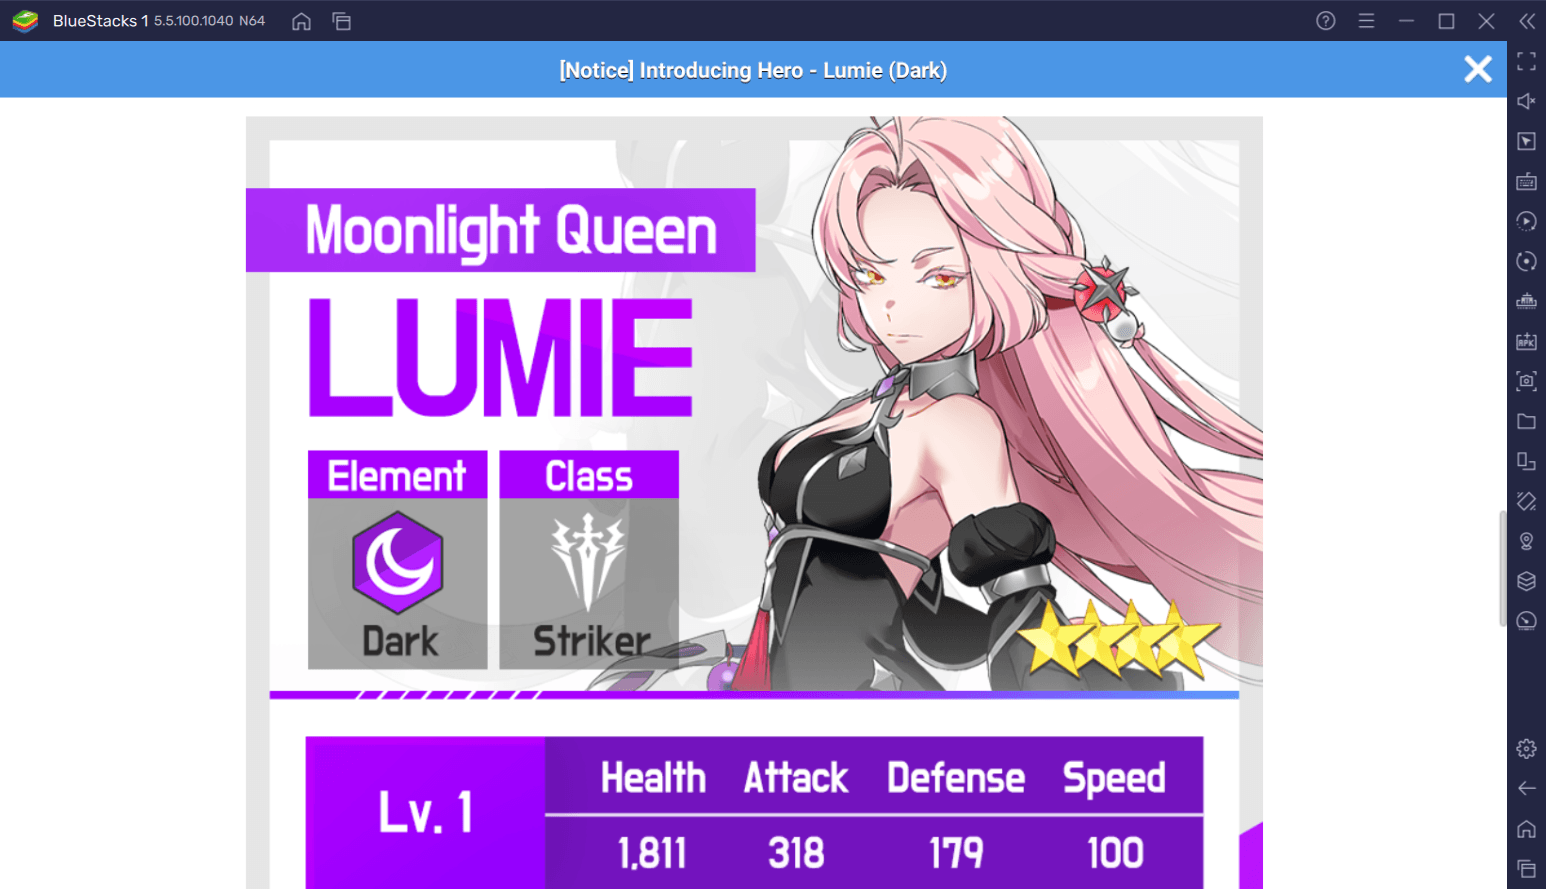 Lord of Heroes – New Hero Dark Lumie, New Feature Alchemarket, and New Events